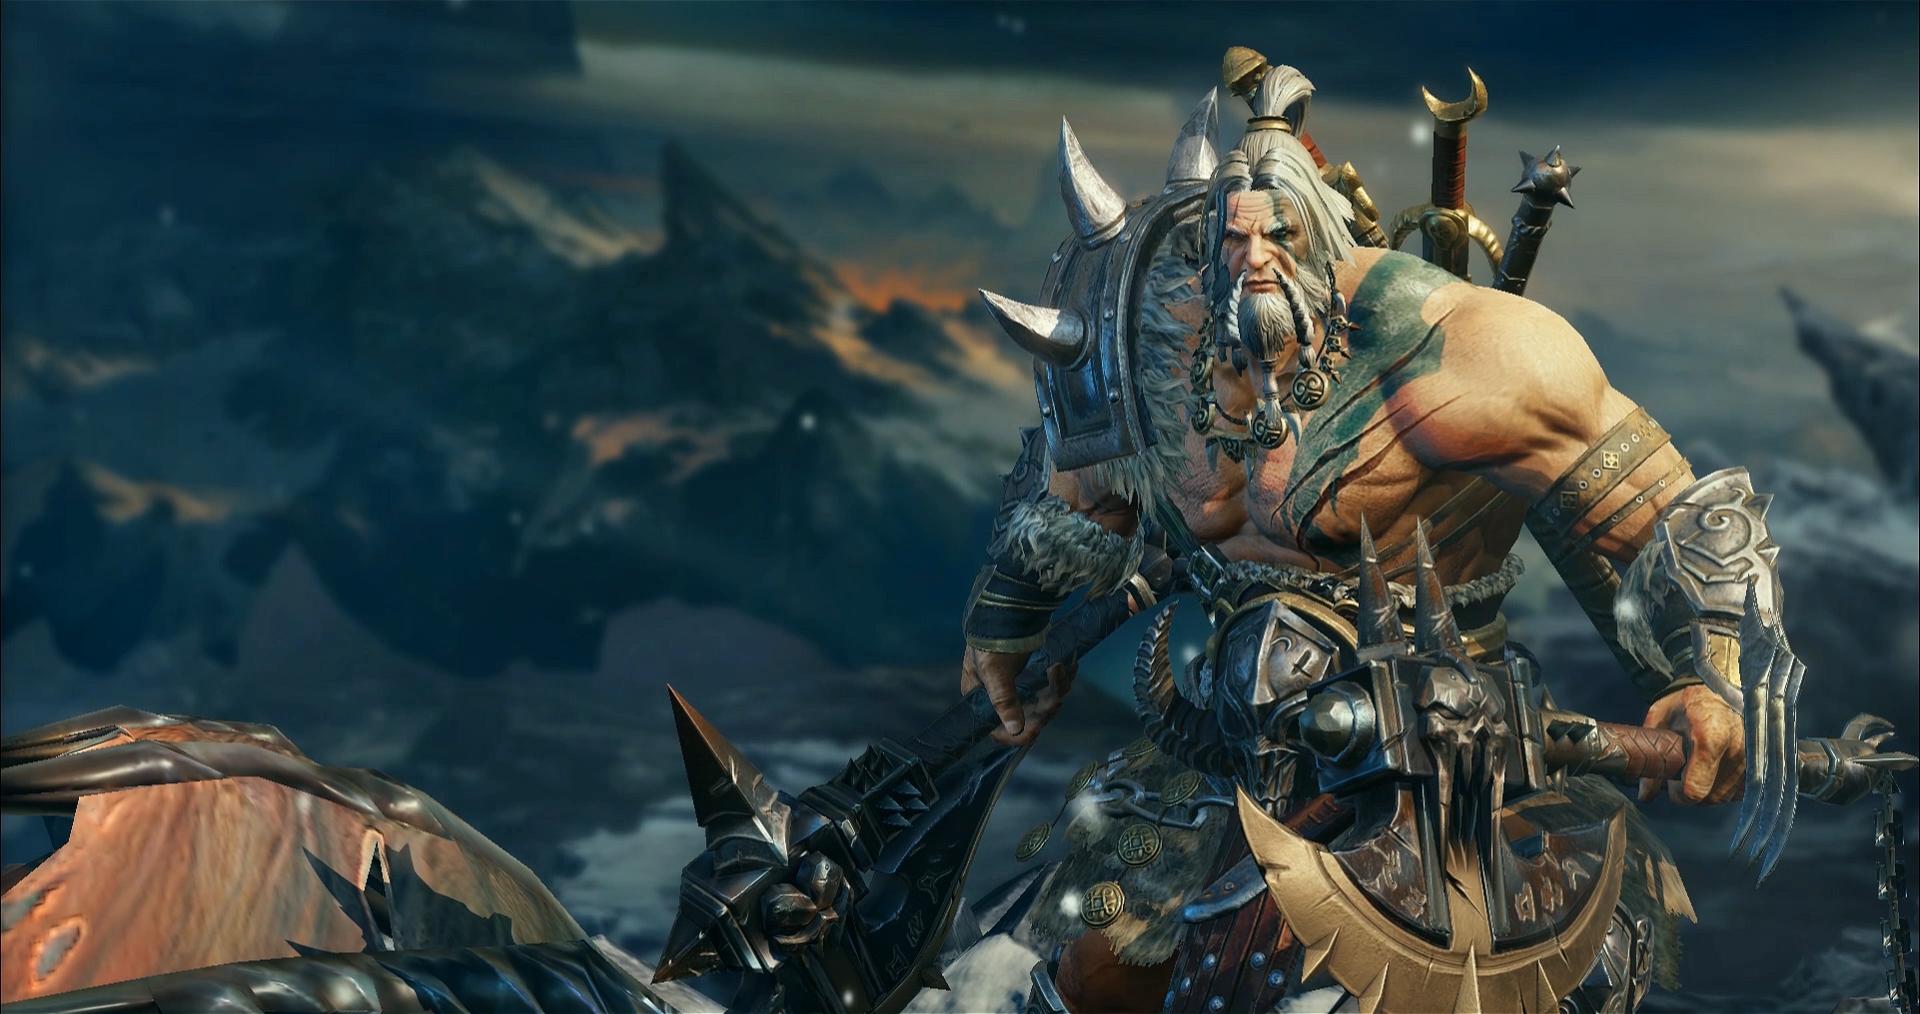 The Barbarian focuses on dealing massive physical damage at close range.